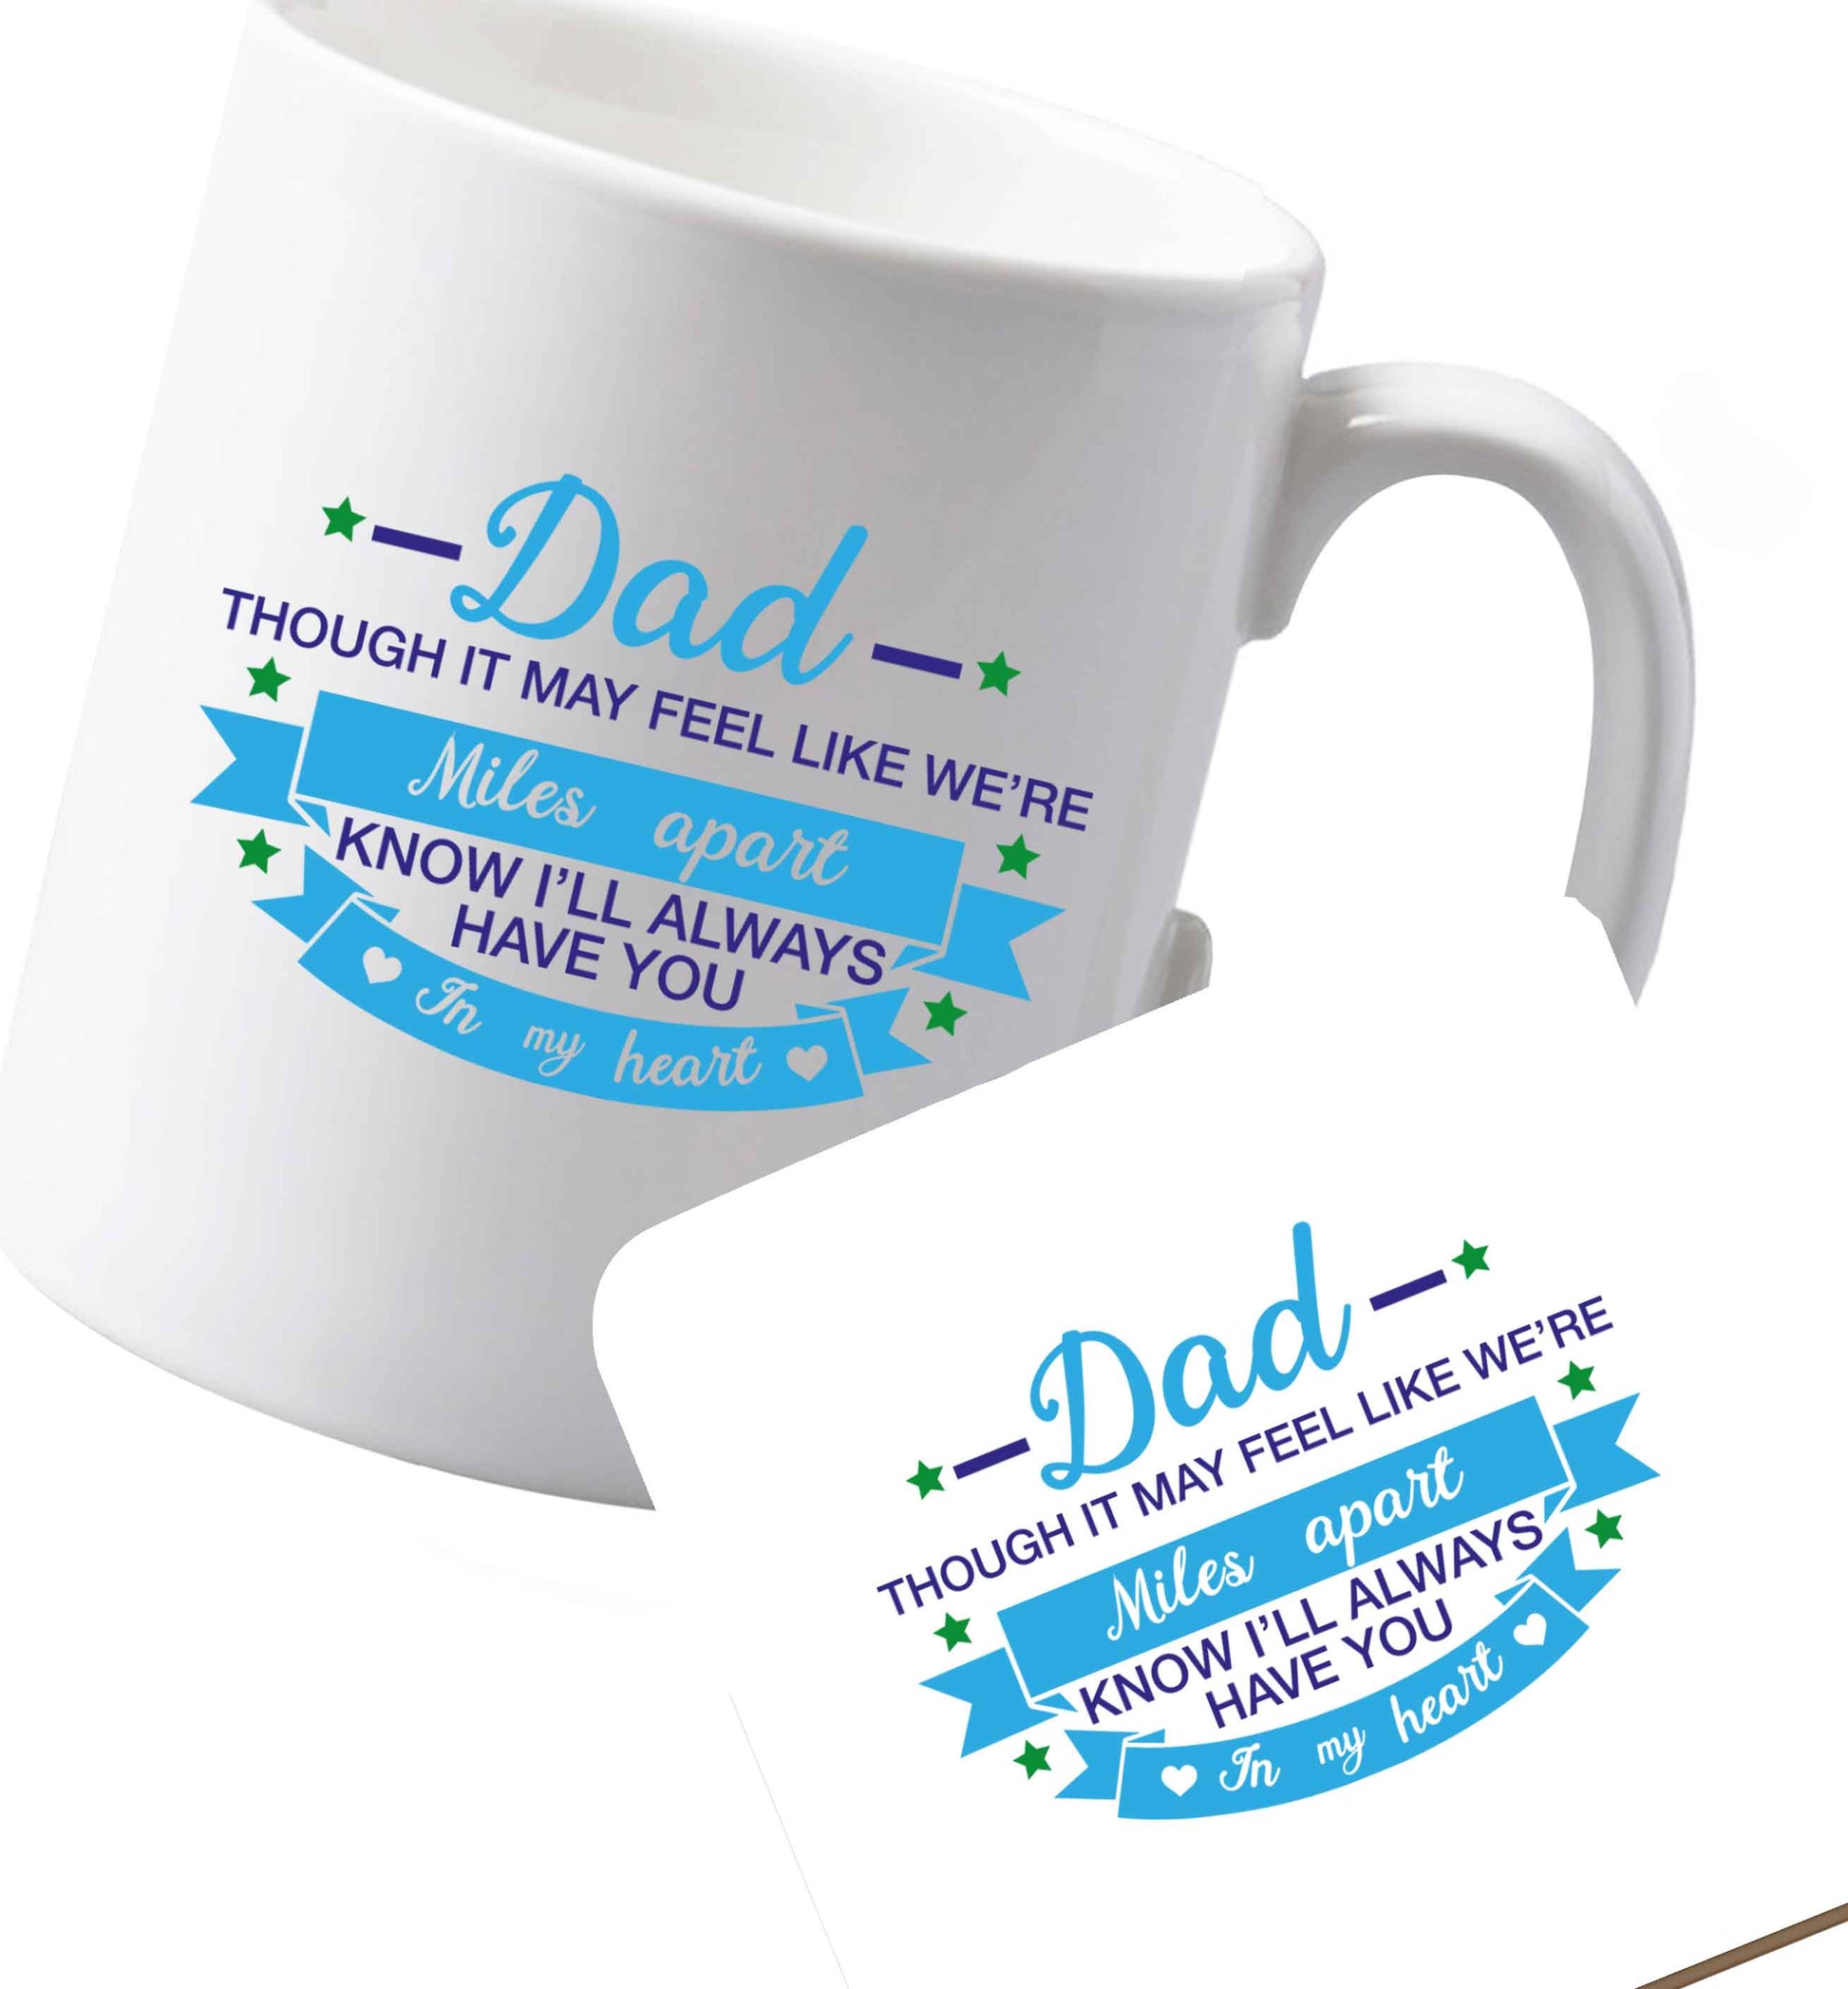 10 oz Ceramic mug and coaster Dad though it may feel like we're miles apart know I'll always have you in my heart both sides